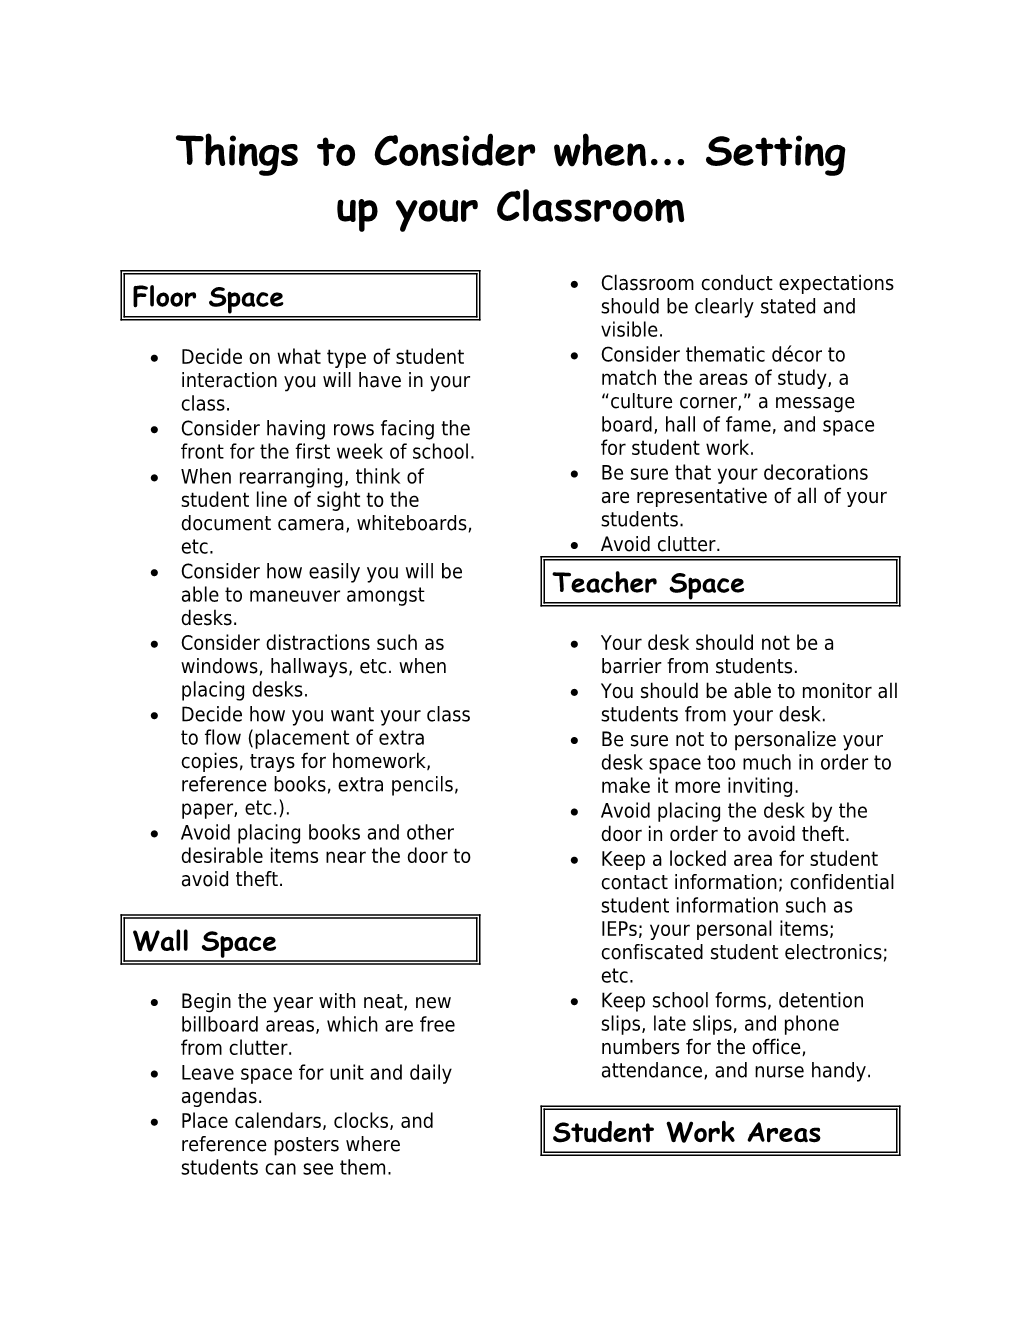 Self Directed Group Notes: Setting up Your Classroom